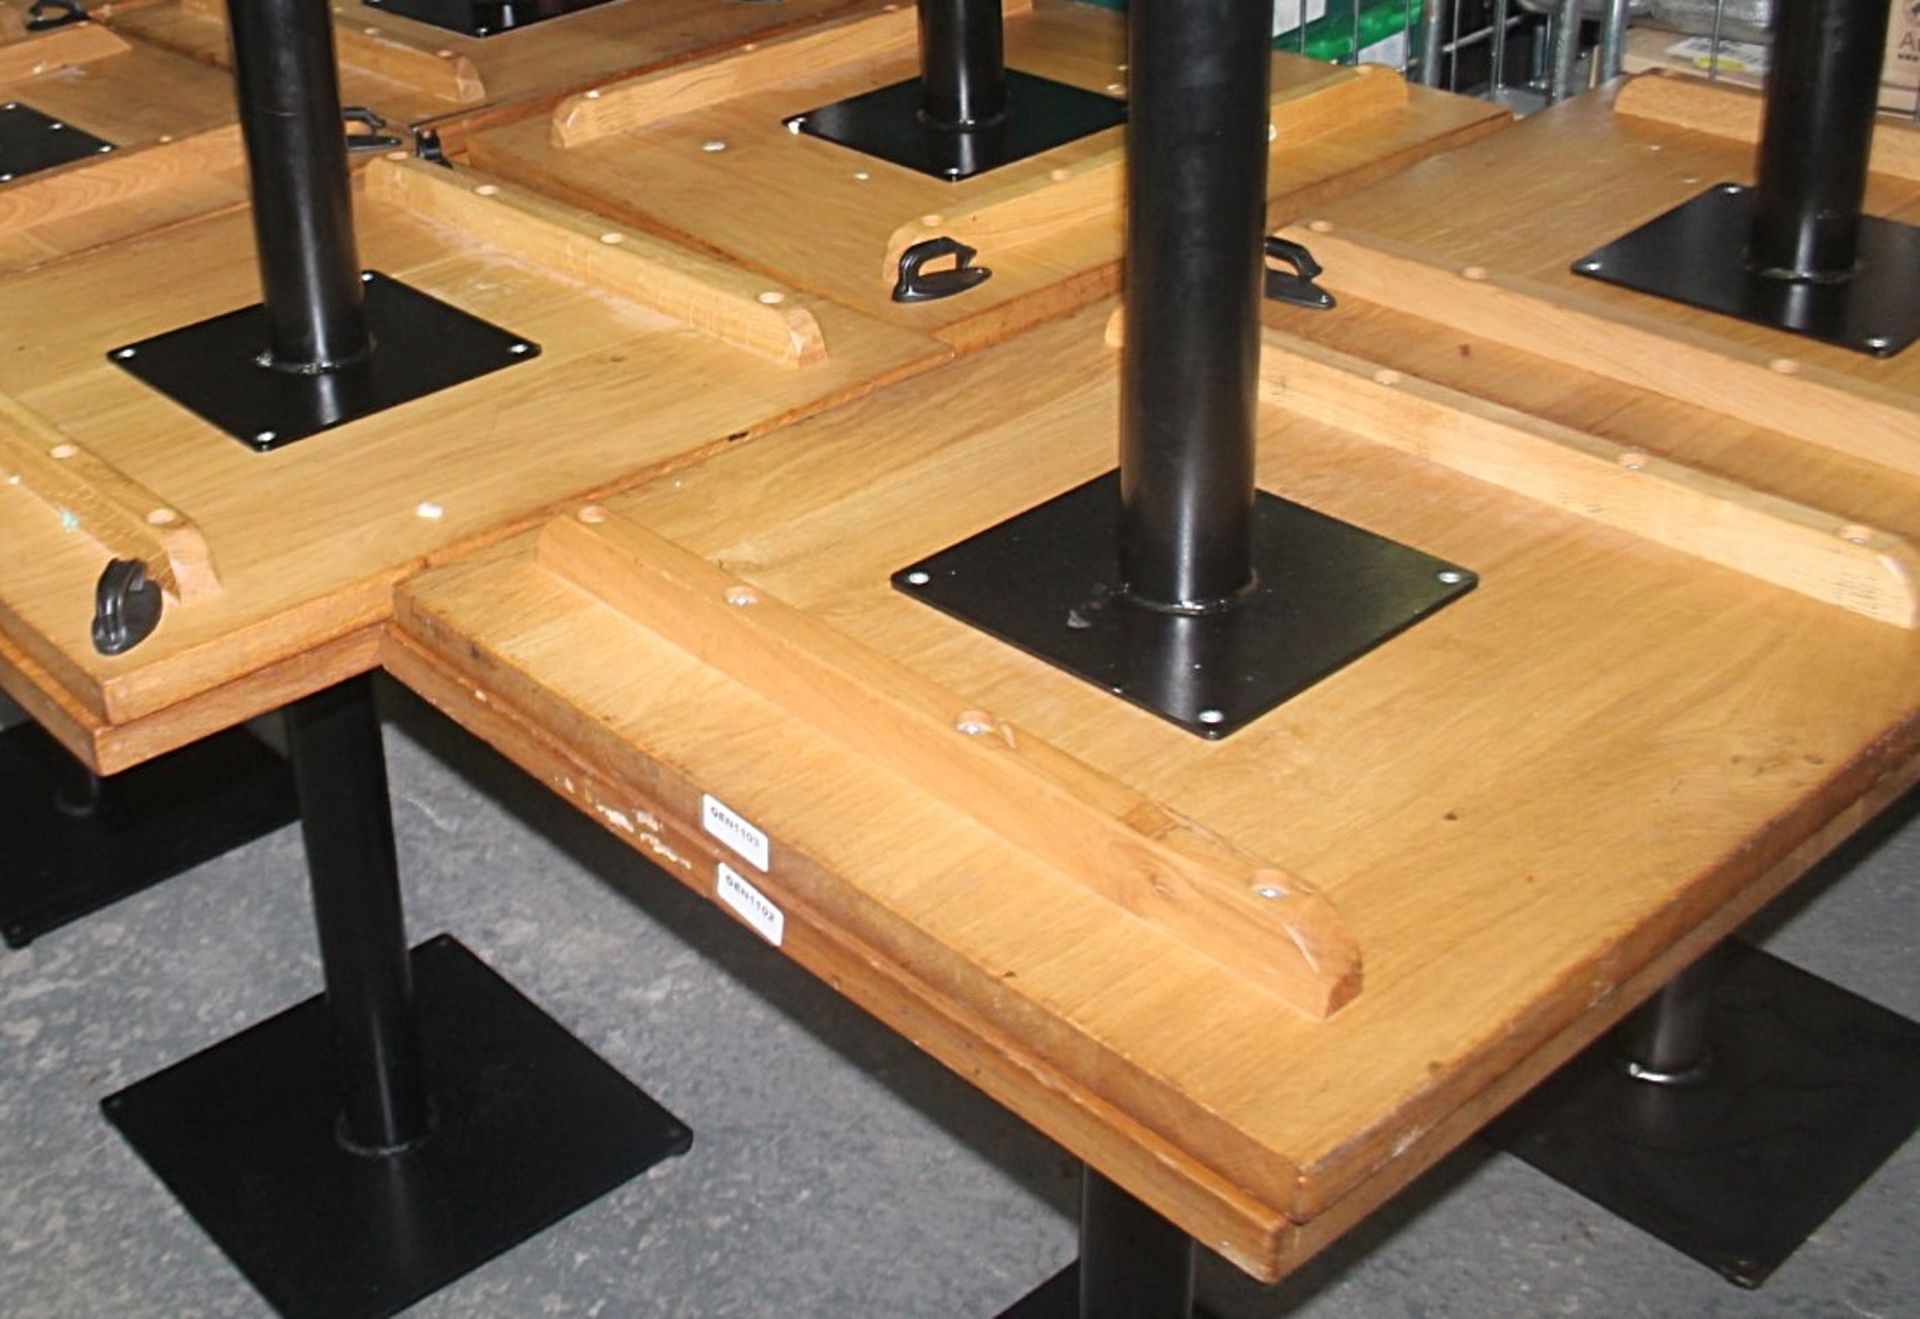 4 x Solid Oak Restaurant Dining Tables - Natural Rustic Knotty Oak Tops With Black Cast Iron Bases - - Image 4 of 4